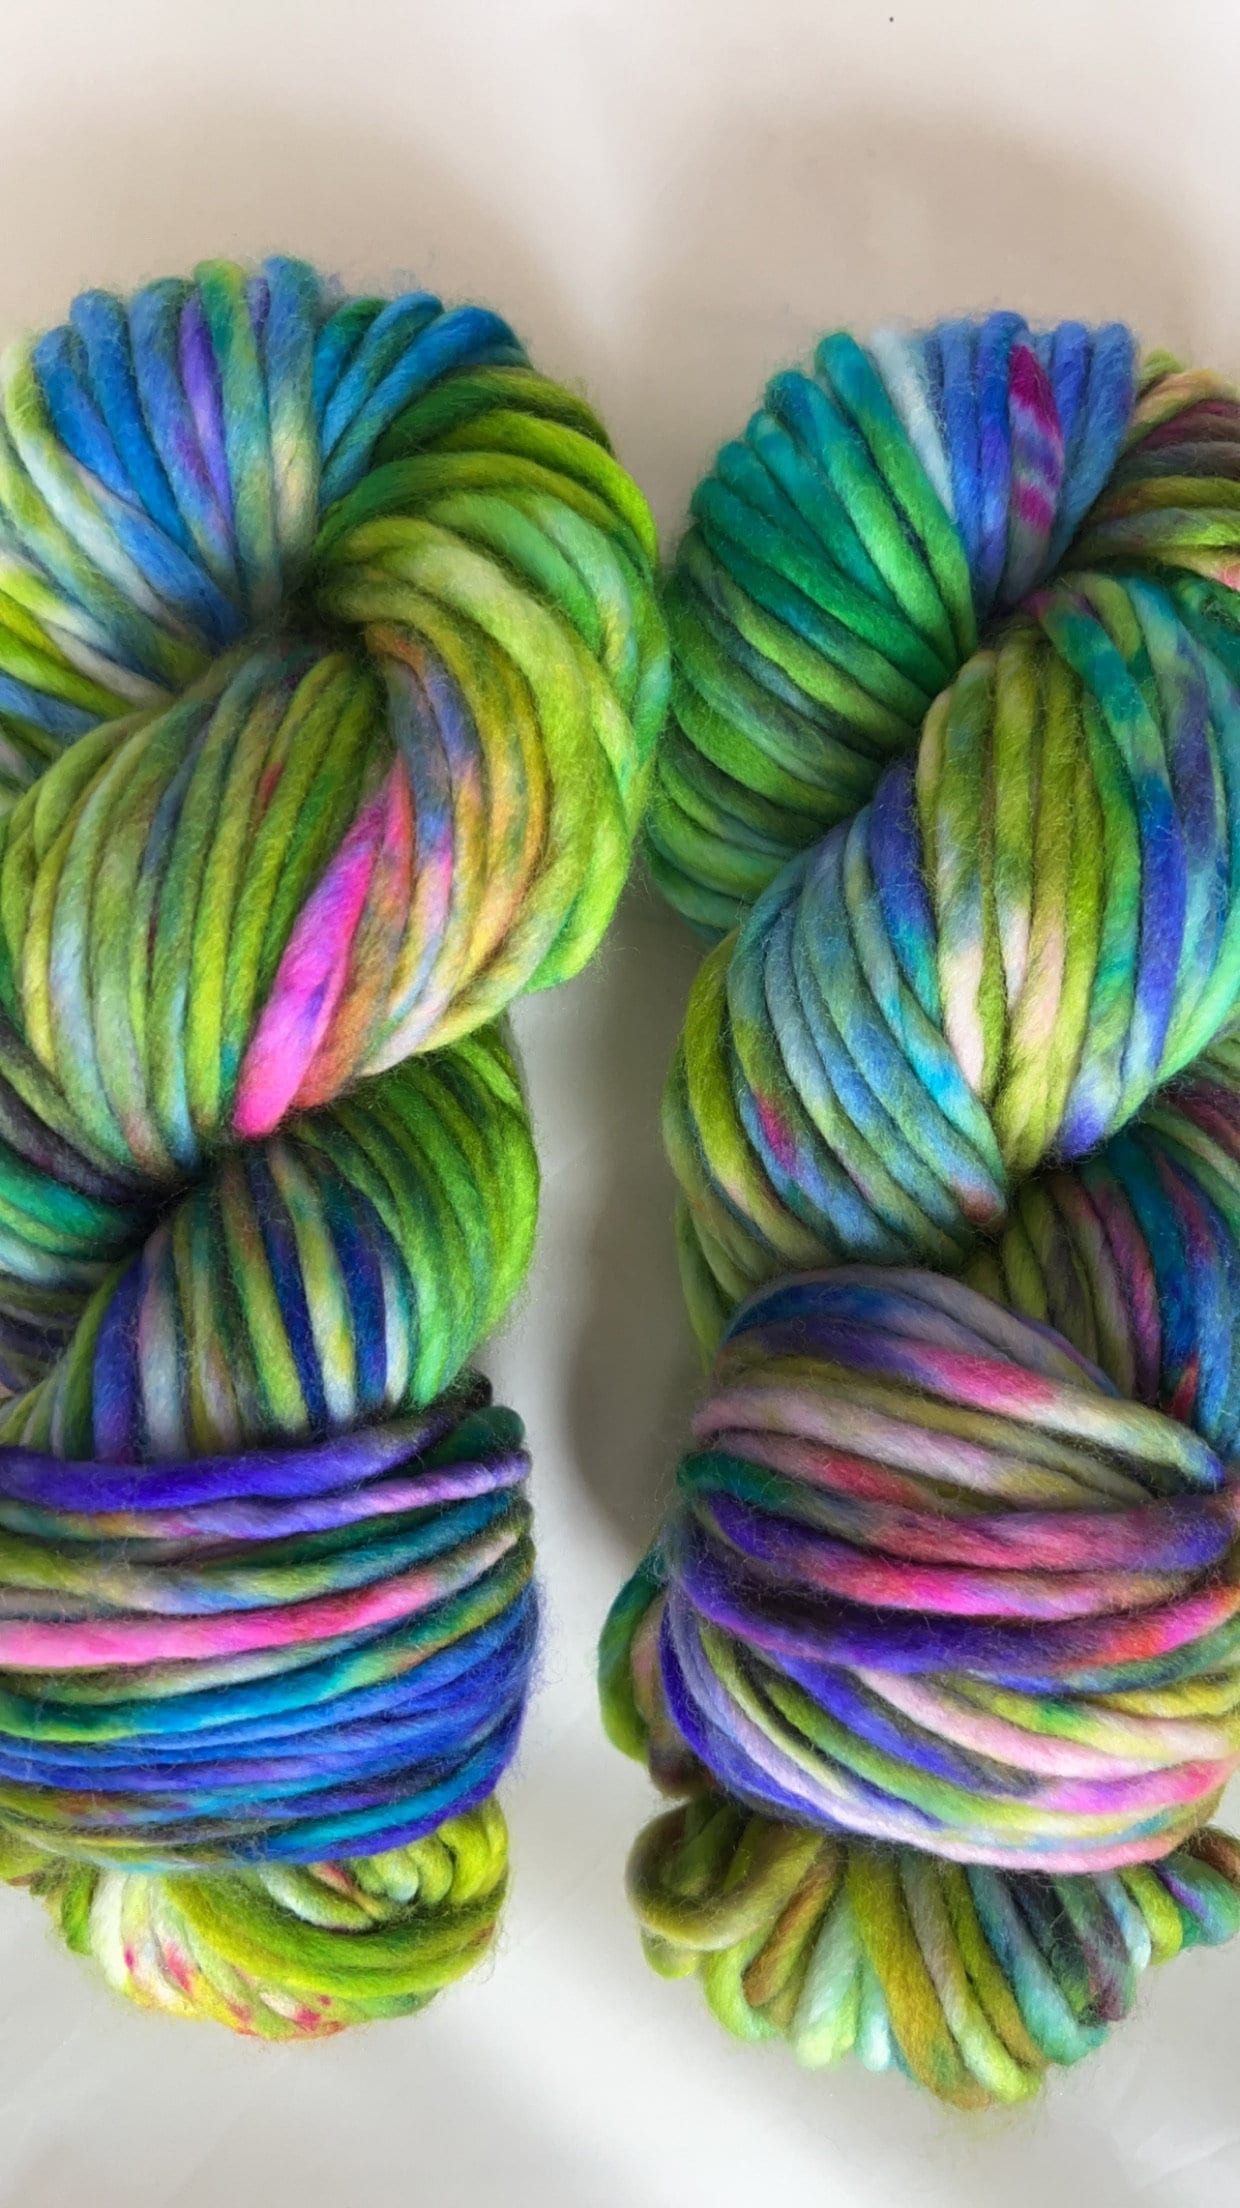 Hand-Dyed Merino Wool Yarn - Soft and Durable Yarn for Knitting and Crocheting | Indie Dyed Merino Wool | Super Bulky | Wild Thing